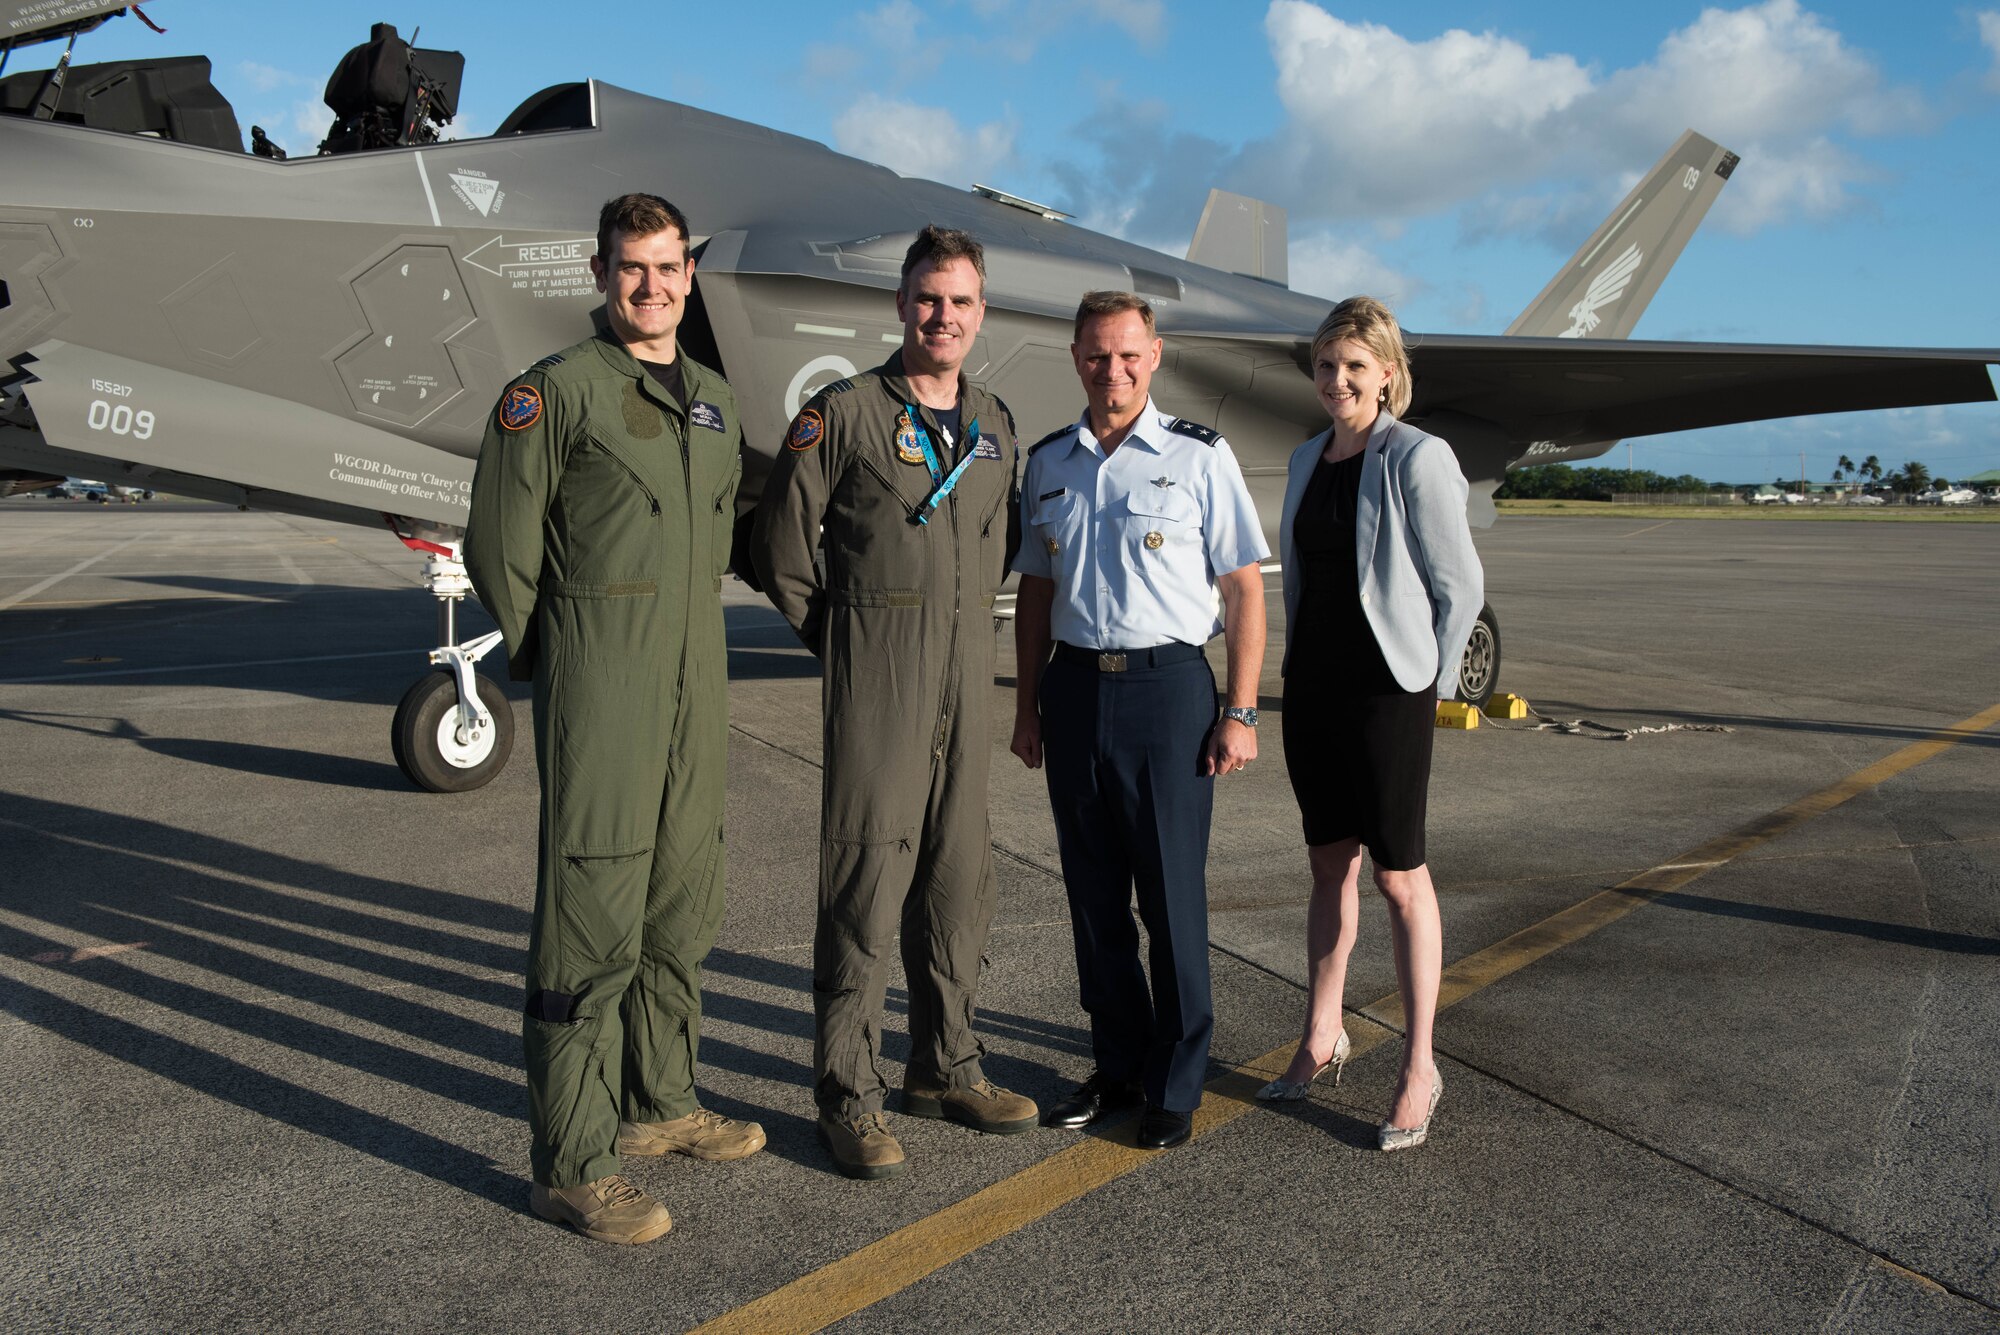 Royal Australian Air Force Flight Lieutenant Ben Monaghan, RAAF Wing Commander Darren Clare, No. 3 Squadron commander, U.S. Air Force Maj. Gen. Russ Mack, Pacific Air Forces deputy commander, and Sally Timbs, Australian Consul, Defense Policy, pose for a photo in front of a RAAF F-35A at Joint Base Pearl Harbor-Hickam, Hawaii, Dec. 3, 3018.